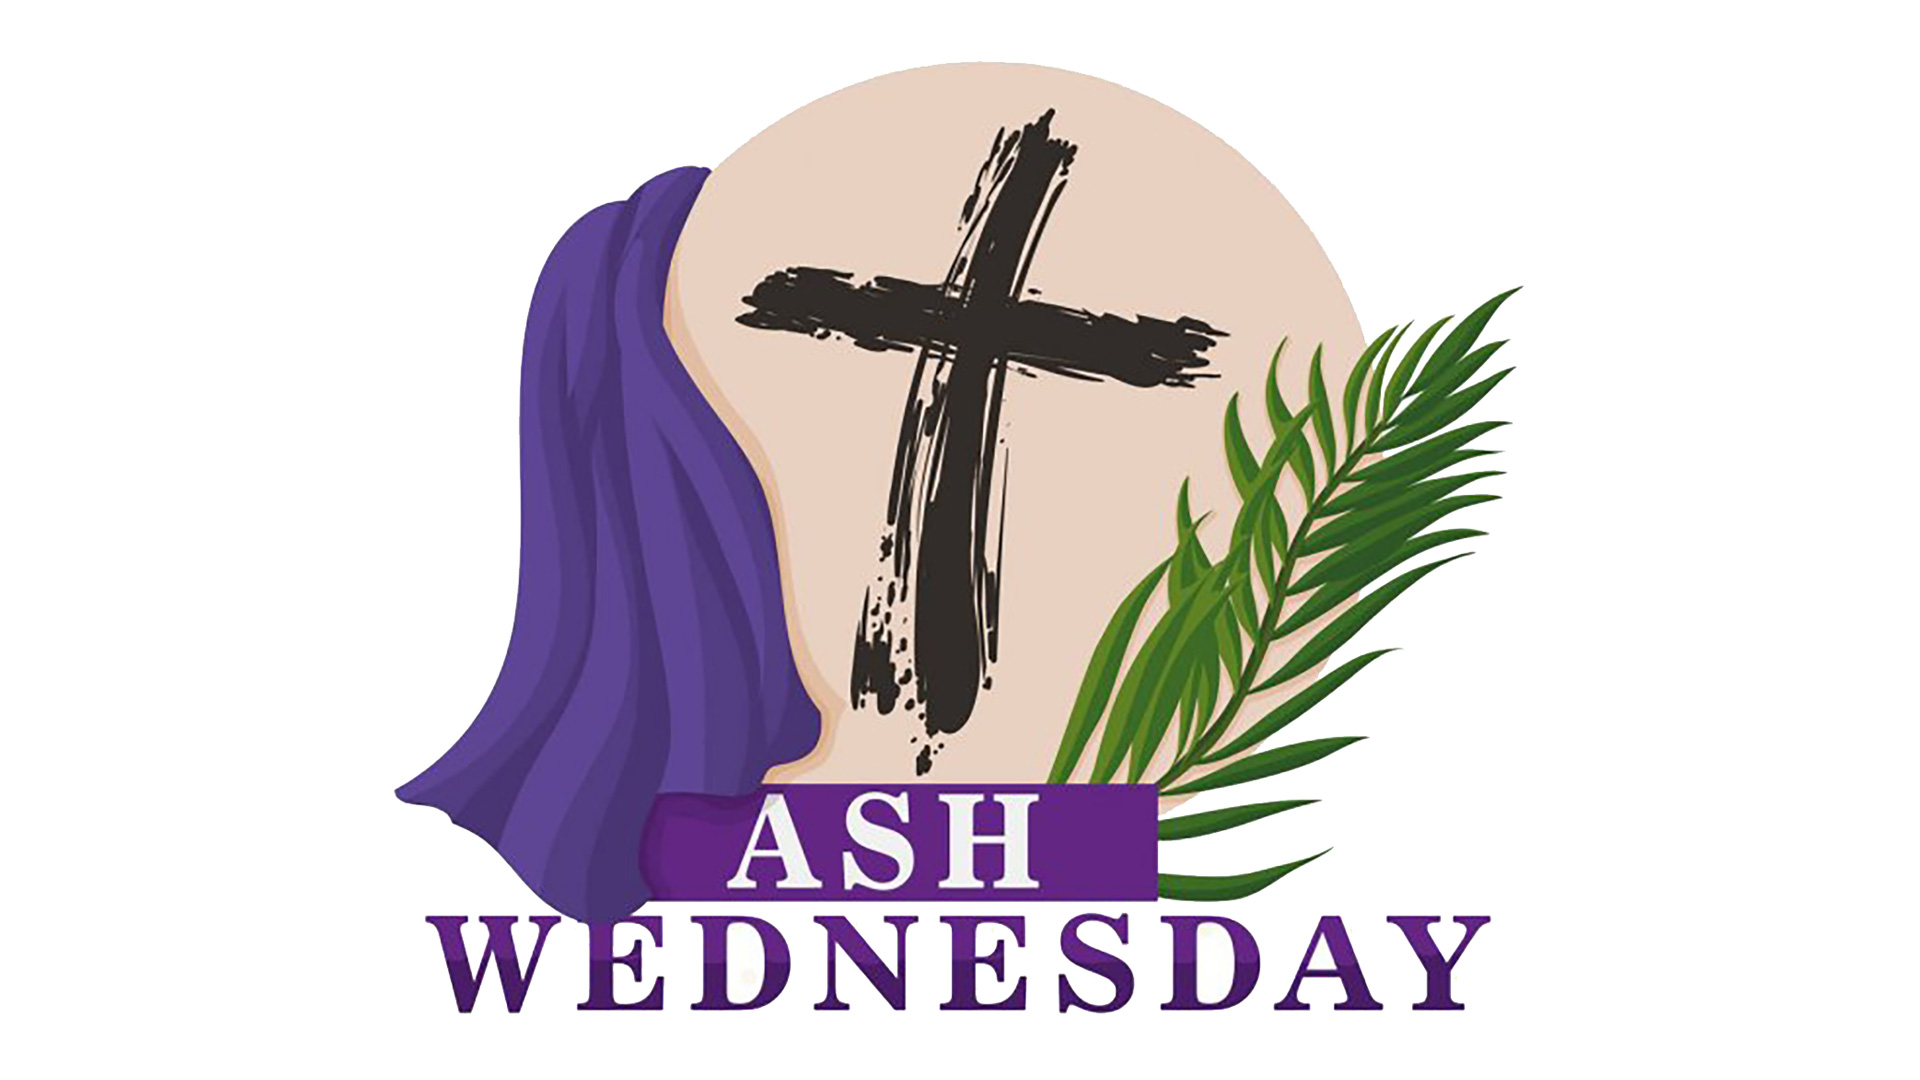 Ash Wednesday - Beige Circle with Black Cross and Blue Robe on Left and Palm on Right